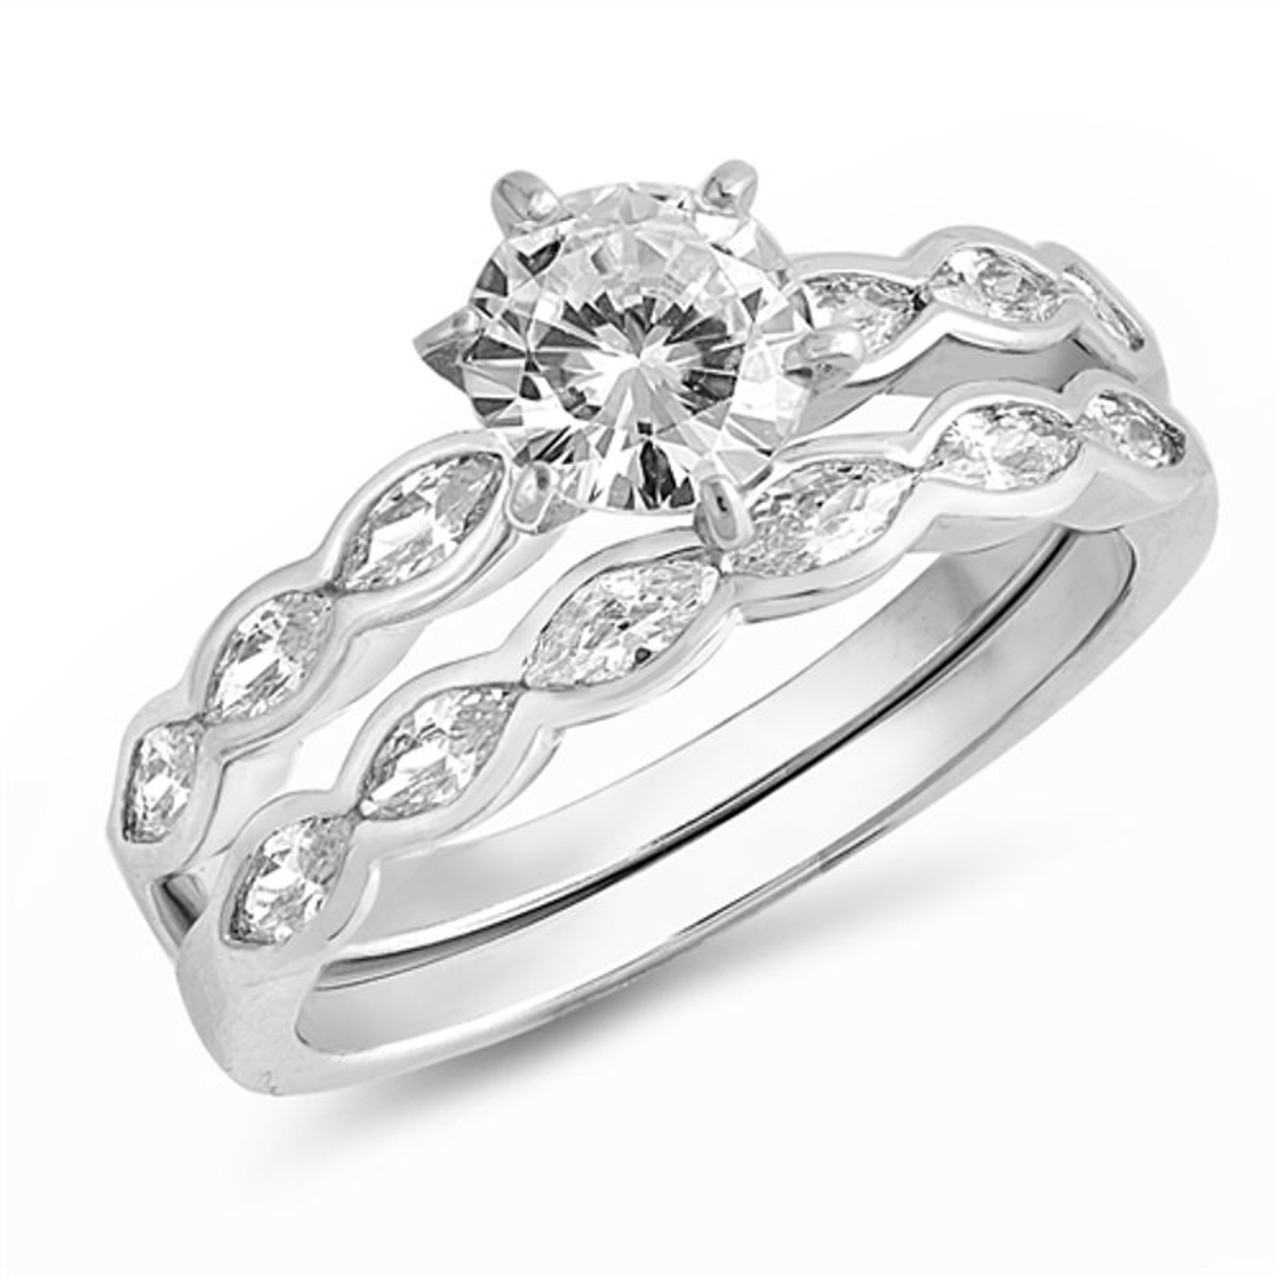 3.23c Wedding Ring Set Engagement CZ 925 Sterling Silver – A Sense of Style